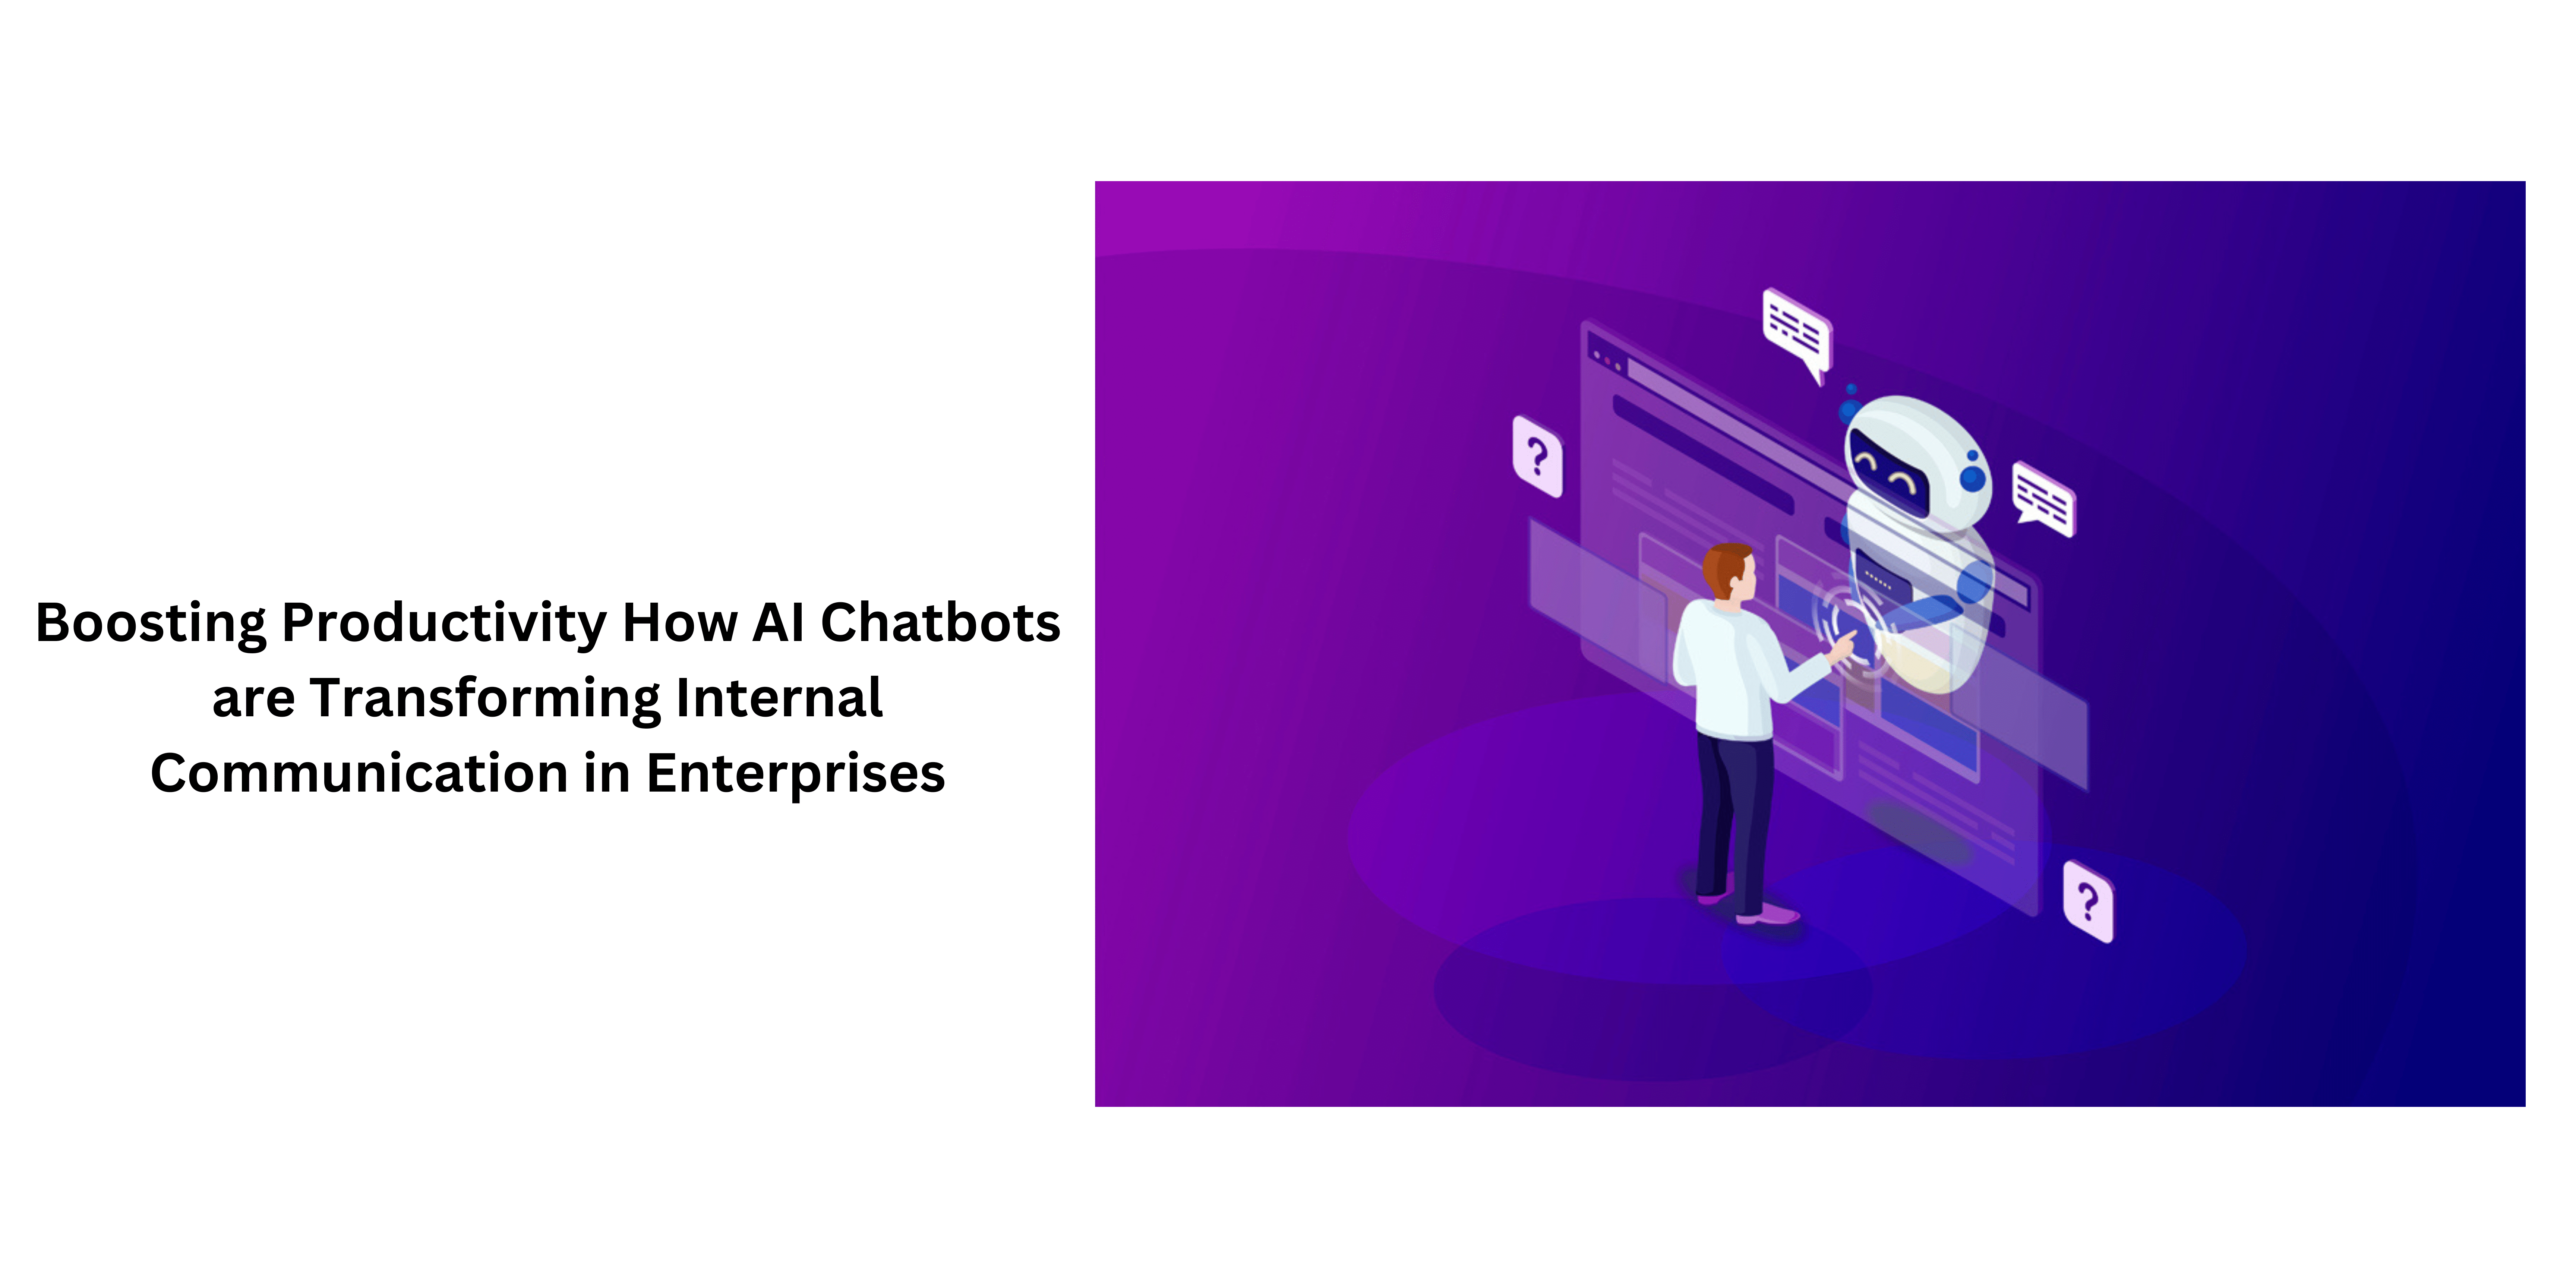 Boosting Productivity How AI Chatbots are Transforming Internal Communication in Enterprises